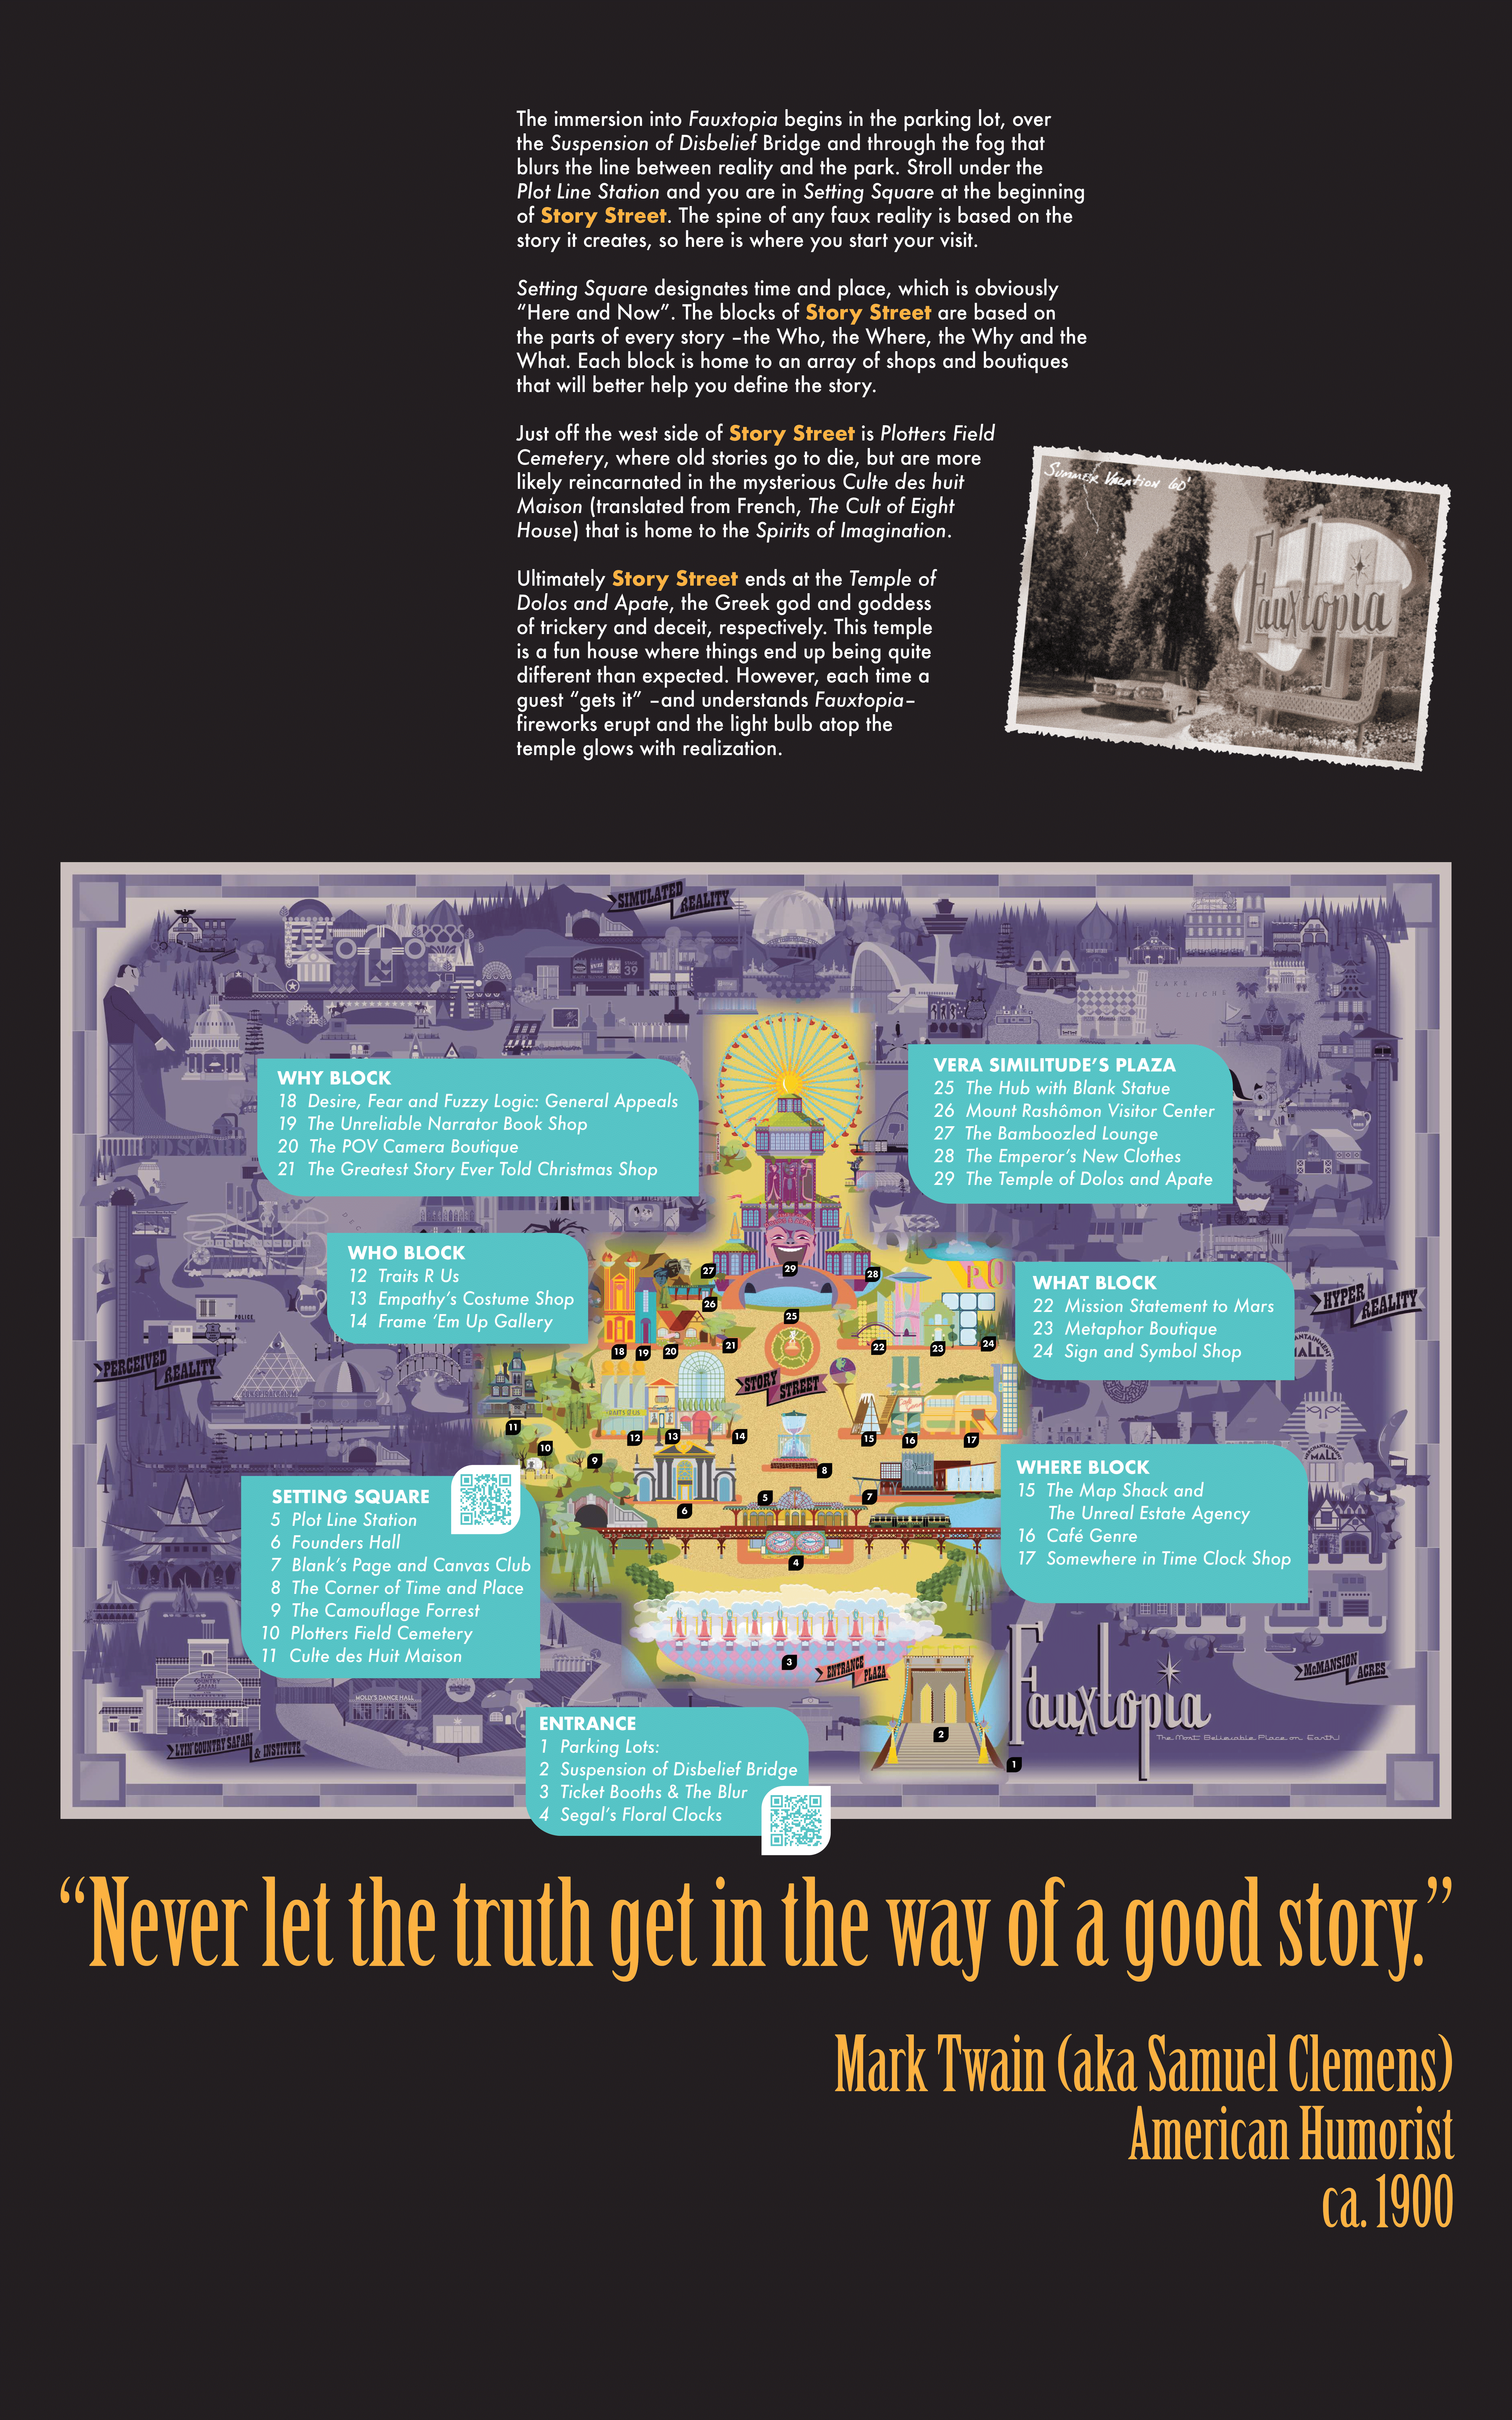 Image of map with text describing areas of map: ""Never let the truth get in the way of a good story."  -Mark Twain (aka Samuel Clemens), American Humorist, ca. 1900  The immersion into Fauxtopia begins in the parking lot, over the Suspension of Disbelief Bridge and through the fog that blurs the line between reality and the park. Stroll under the Plot Line Station and you are in Setting Square at the beginning of Story Street. The spine of any faux reality is based on the story it creates, so here is where you start your visit.  Setting Square designates time and place, which is obviously “Here and Now”. The blocks of Story Street are based on the parts of every story –the Who, the Where, the Why and the What. Each block is home to an array of shops and boutiques that will better help you define the story.  Just off the west side of Story Street is Plotters Field Cemetery, where old stories go to die, but are more likely reincarnated in the mysterious Culte des huit Maison (translated from French, The Cult of Eight House) that is home to the Spirits of Imagination.  Ultimately Story Street ends at the Temple of Dolos and Apate, the Greek god and goddess of trickery and deceit, respectively. This temple is a fun house where things end up being quite different than expected. However, each time a guest “gets it” –and understands Fauxtopia– fireworks erupt and the light bulb atop the temple glows with realization.  ENTRANCE 1 Parking Lots: 2 Suspension of Disbelief Bridge 3 Ticket Booths & The Blur 4 Segal's Floral Clocks  SETTING SQUARE 5 Plot Line Station 6 Founders Hall 7 Blank's Page and Canvas Club 8 The Corner of Time and Place 9 The Camoflage Forrest 10 Plotters Field Cemetery 11 Culte des Huit Mansion  WHO BLOCK 12 Traits R Us 13 Empathy's Costume Shop 14 Frame 'Em Up Gallery  WHERE BLOCK 15 The Map Shack and The Unreal Estate Agency 16 Cafe Genre 17 Somewhere in Time Clock Shop   WHY BLOCK 18 Desire, Fear and Fuzzy Logic: General Appeals 19 The Unreliable Narrator Book Shop 20 The POV Camera Boutique 21 The Greatest Story Ever Told Christmas Shop  WHAT BLOCK 22 Mission Statement to Mars 23 Metaphor Boutique 24 Sign and Symbol Shop  VERA SIMILTUDE'S PLAZA 25 The Hub with Blank Statue 26 Mount Rashomon Visitor Center 27 The Bamboozled Lounge 28 The Emperor's New Clothes 29 The Temple of Dolos and Apate